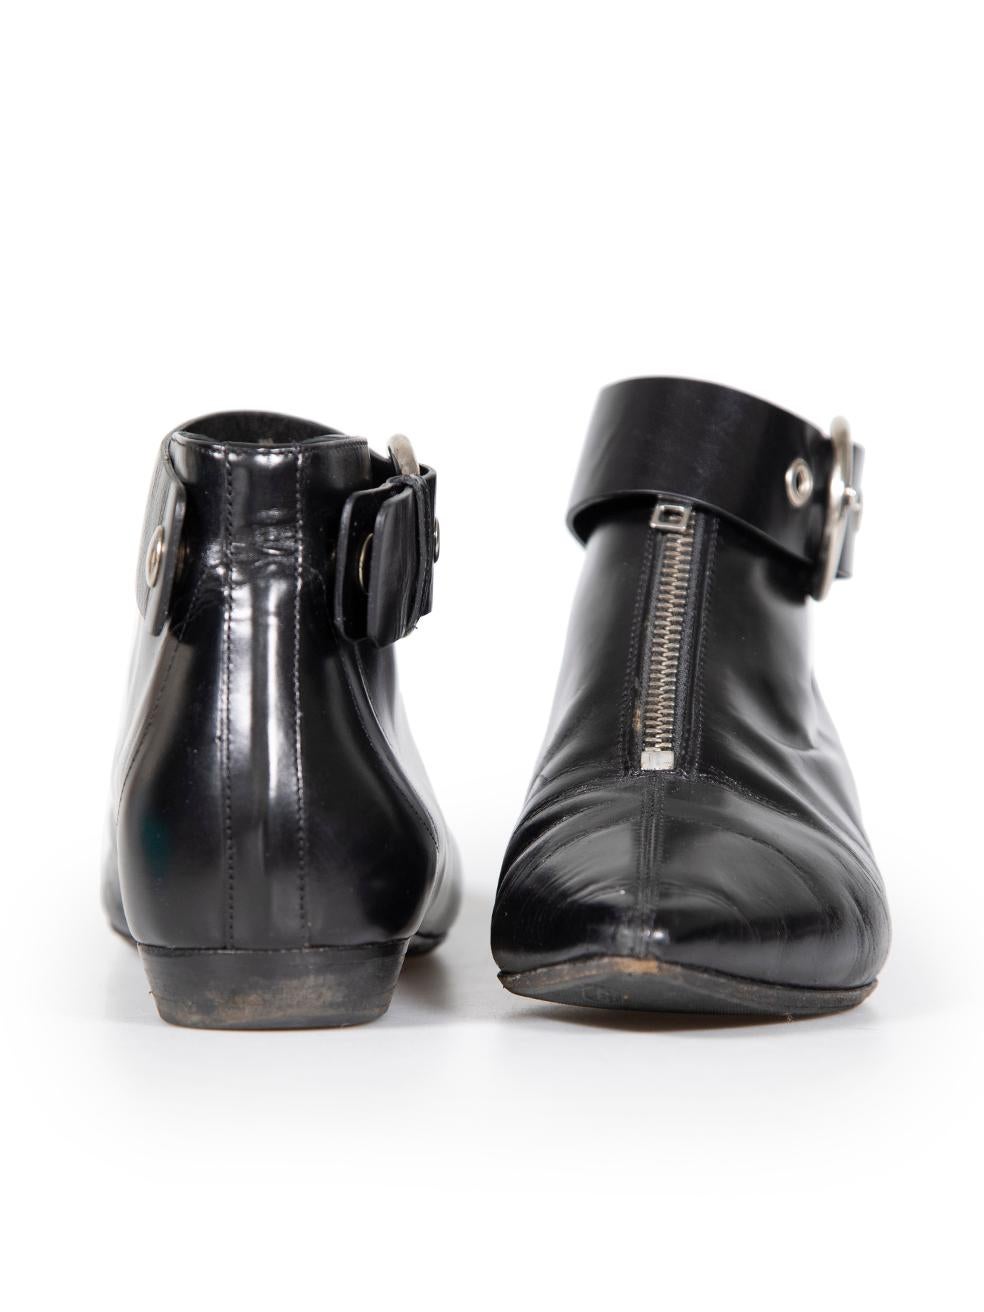 Isabel Marant Black Leather Strappy Pixie Ankle Boots Size IT 36 In Good Condition For Sale In London, GB